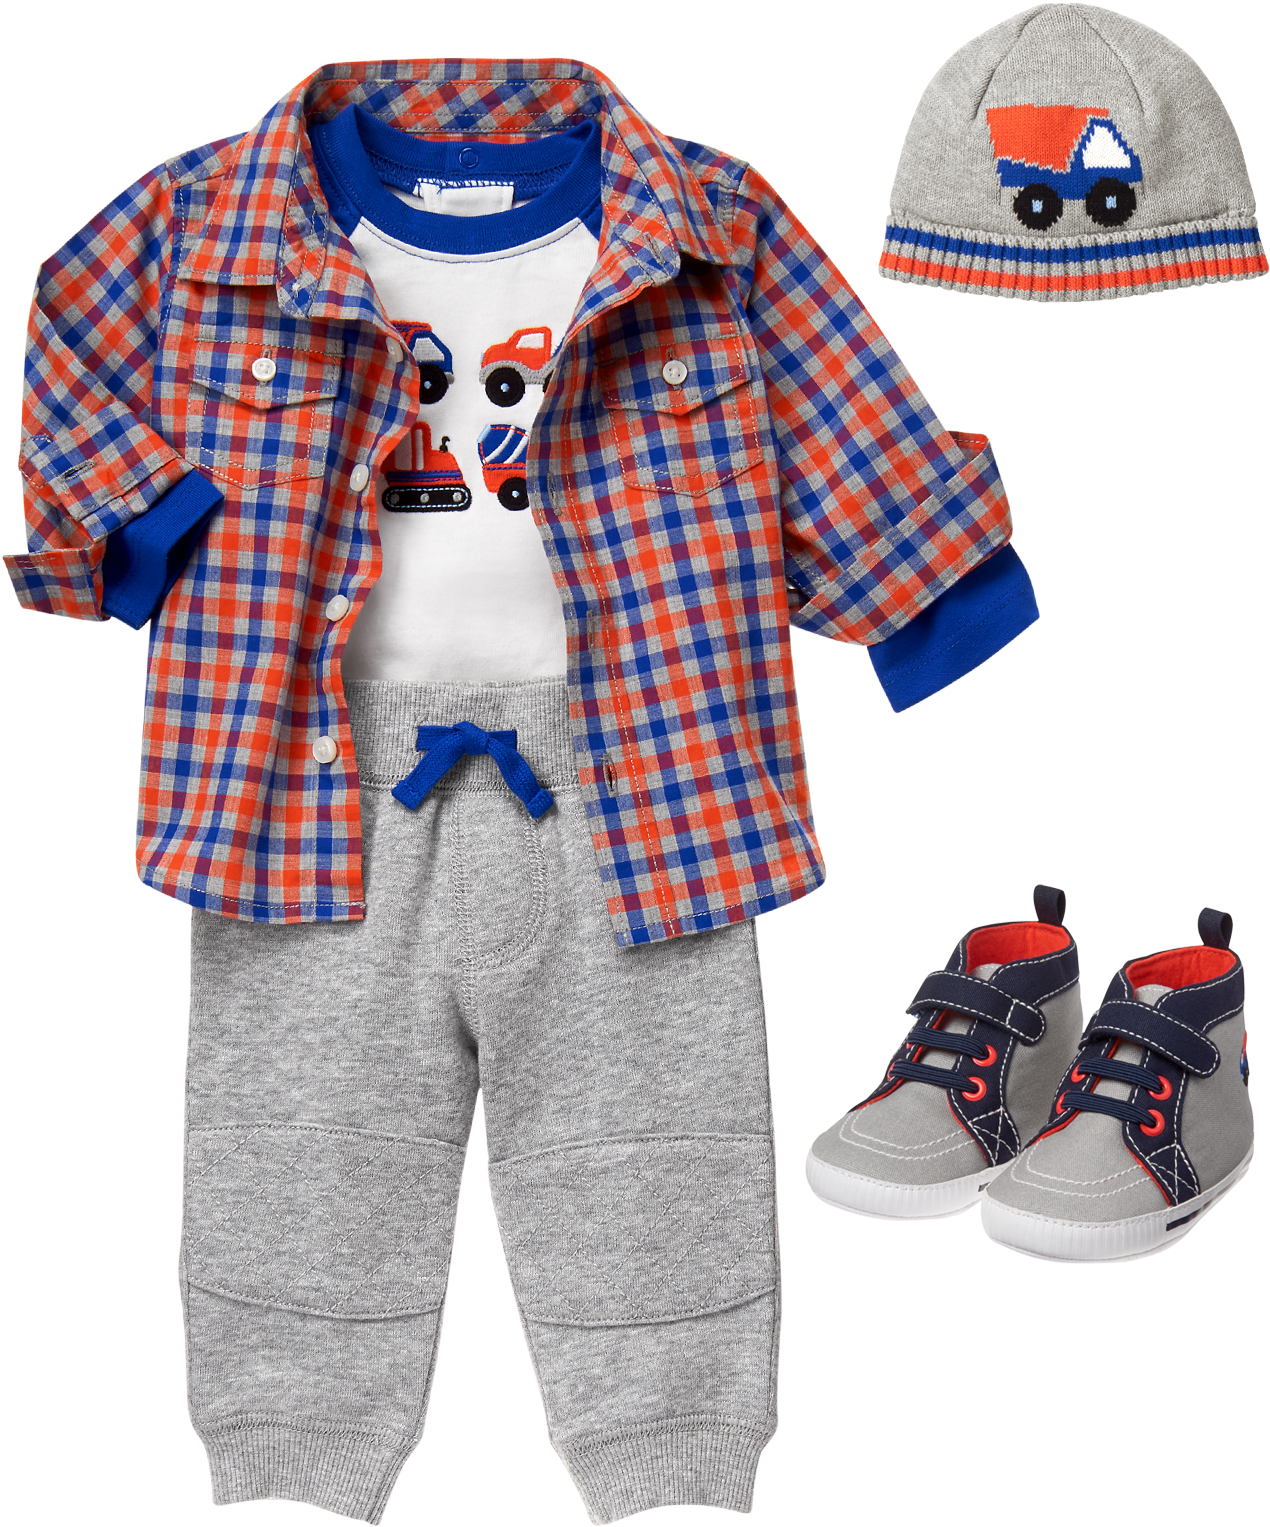 Baby Clothes PNG Free Download